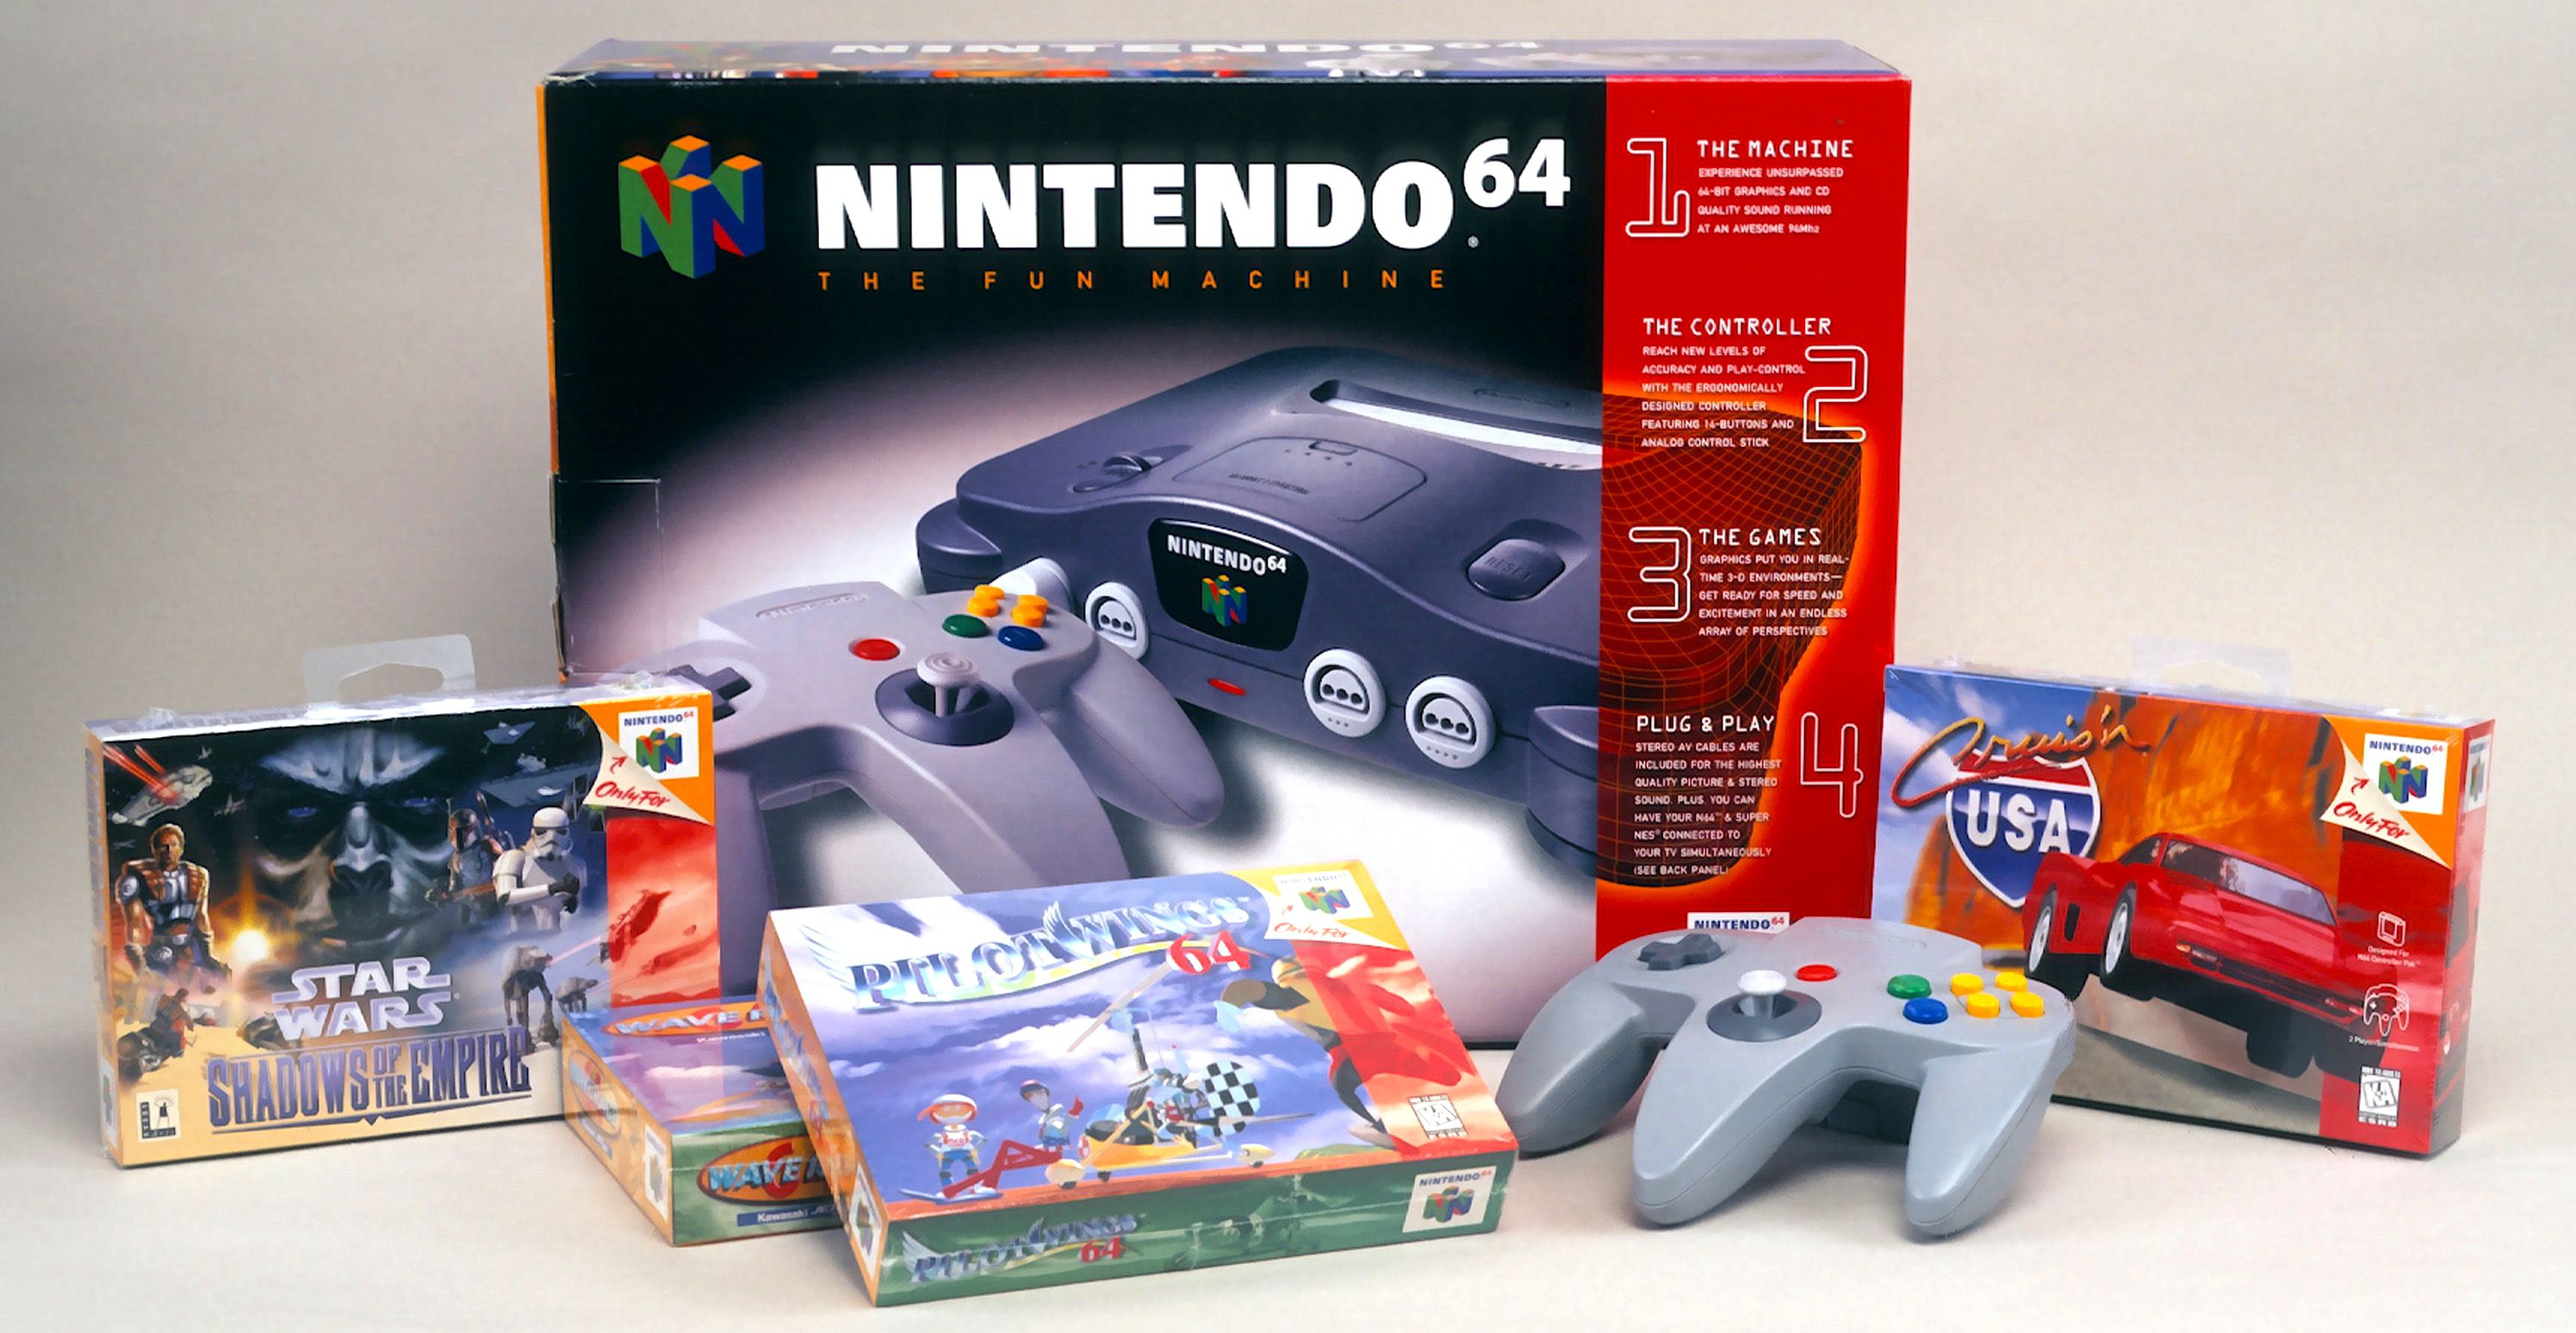 A Nintendo 64 Classic May Be Coming Soon - Where to Find Nintendo